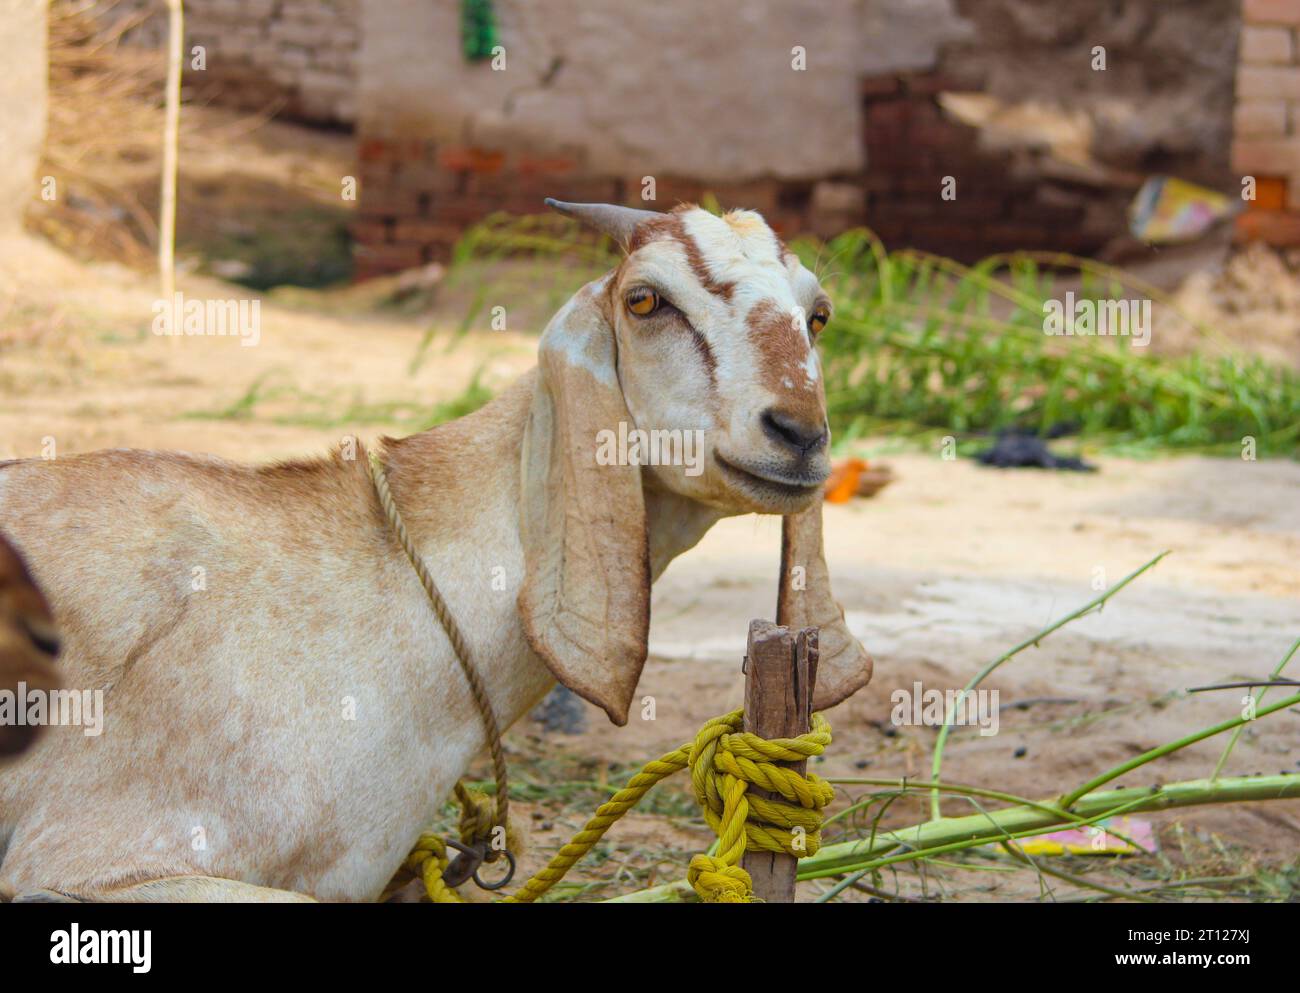 Close up of the Barbari goat eating grass in farm. Goat grazing in farm. Grazing castles. Barbari goat breed in India and Pakistan. Face closeup Stock Photo